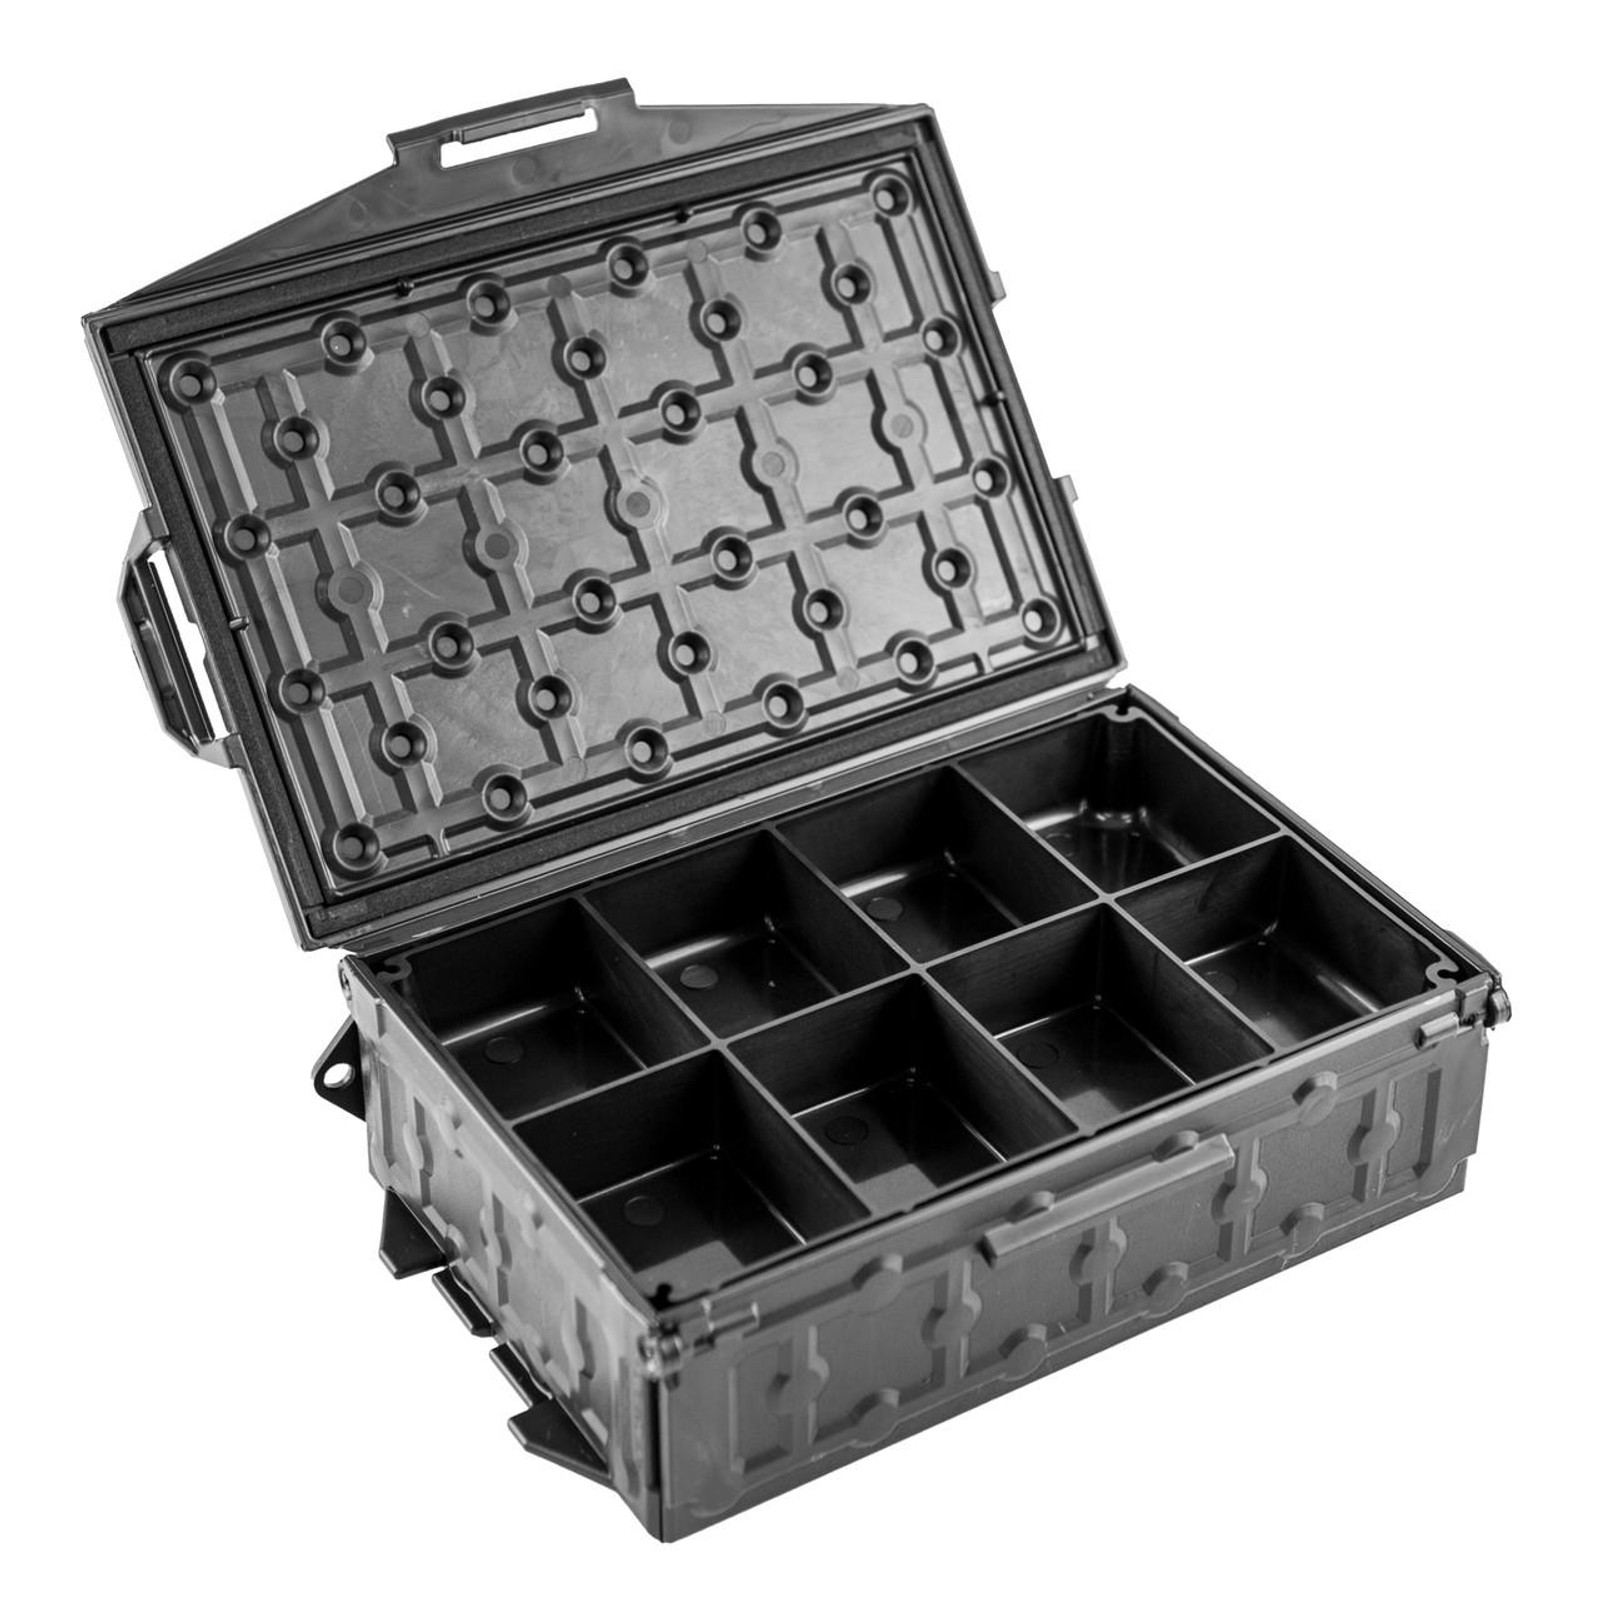  Fully Loaded TracPak Combo Kit, Two Boxes, Track Mount, Handle, and 3 Trays 